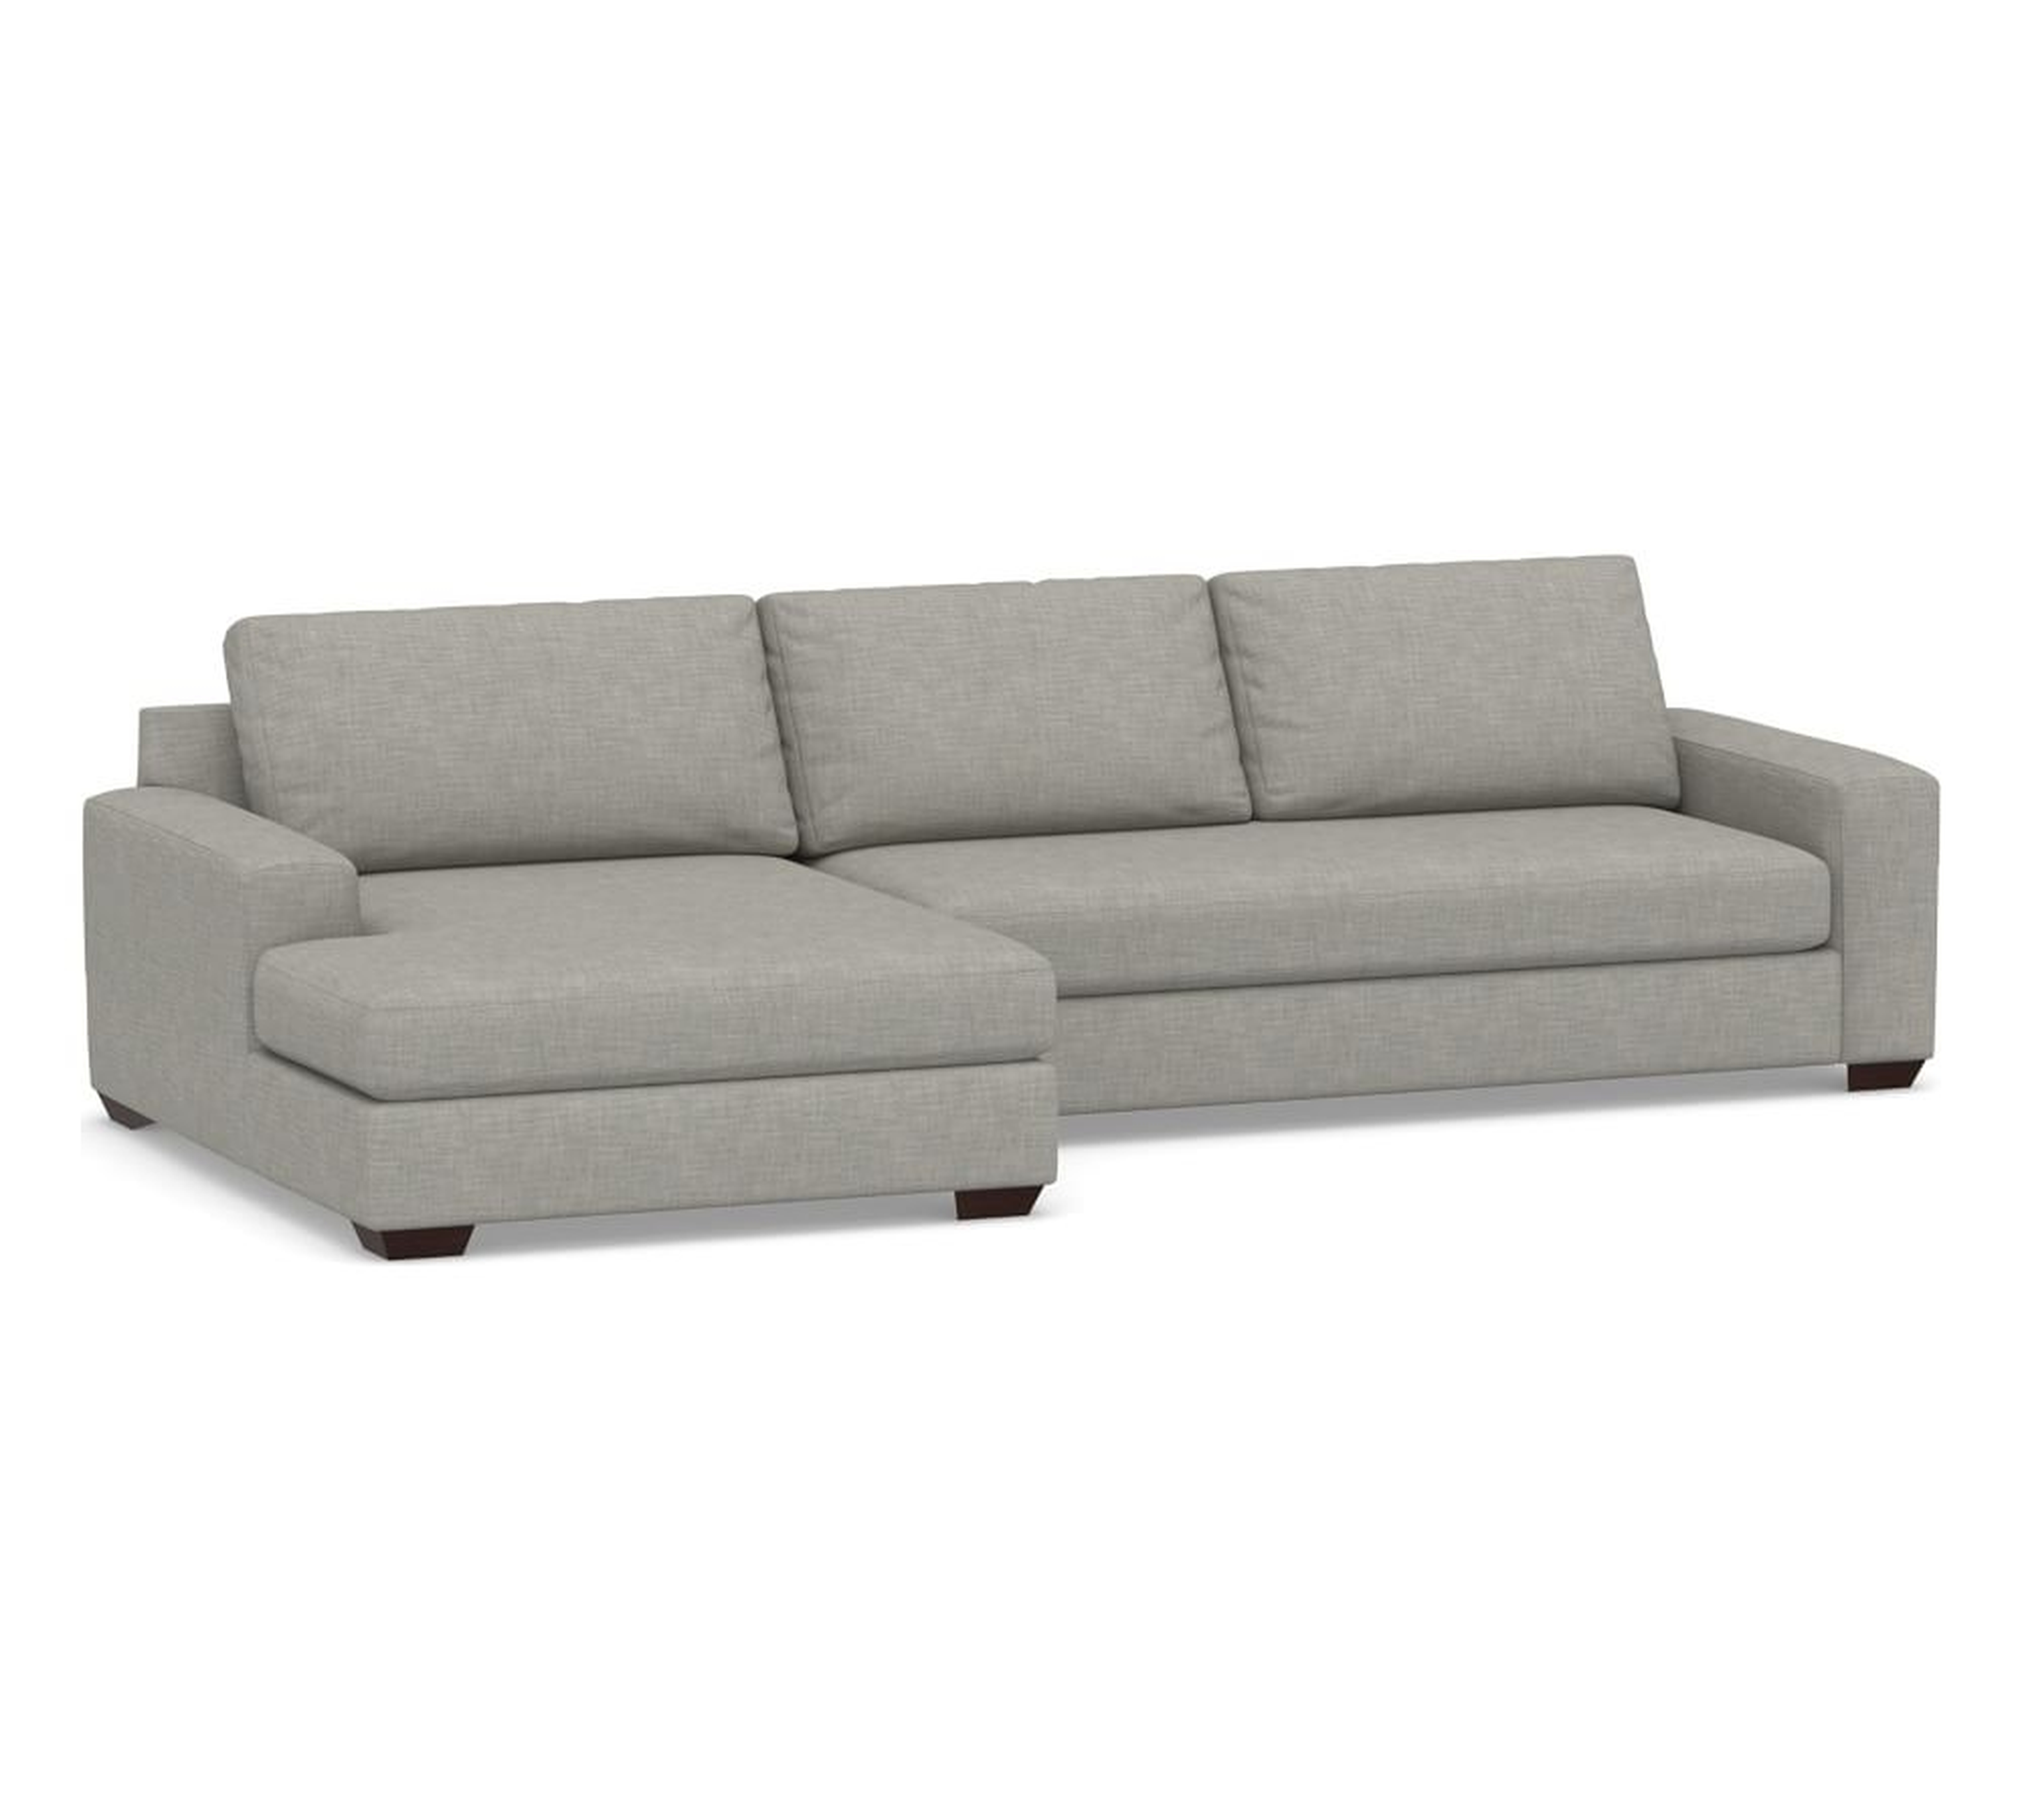 Big Sur Square Arm Upholstered Right Arm Sofa with Double Chaise Sectional and Bench Cushion, Down Blend Wrapped Cushions, Premium Performance Basketweave Light Gray - Pottery Barn